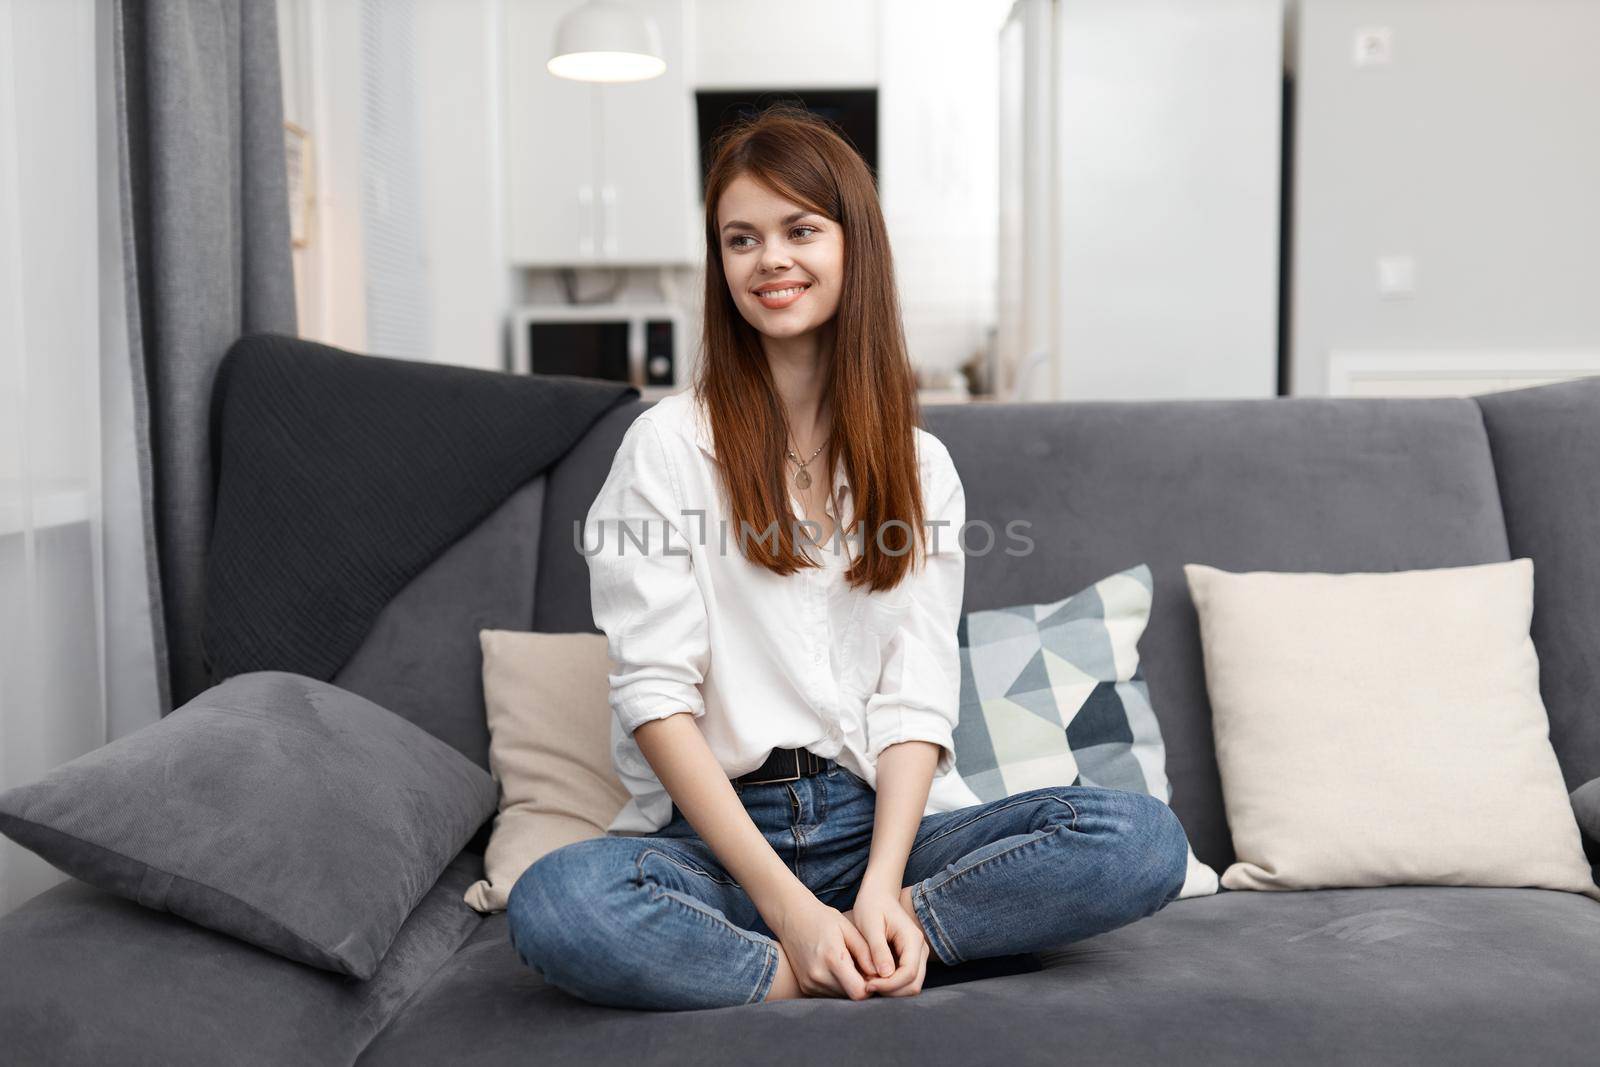 woman at home on the couch rest Comfort in the apartment by SHOTPRIME